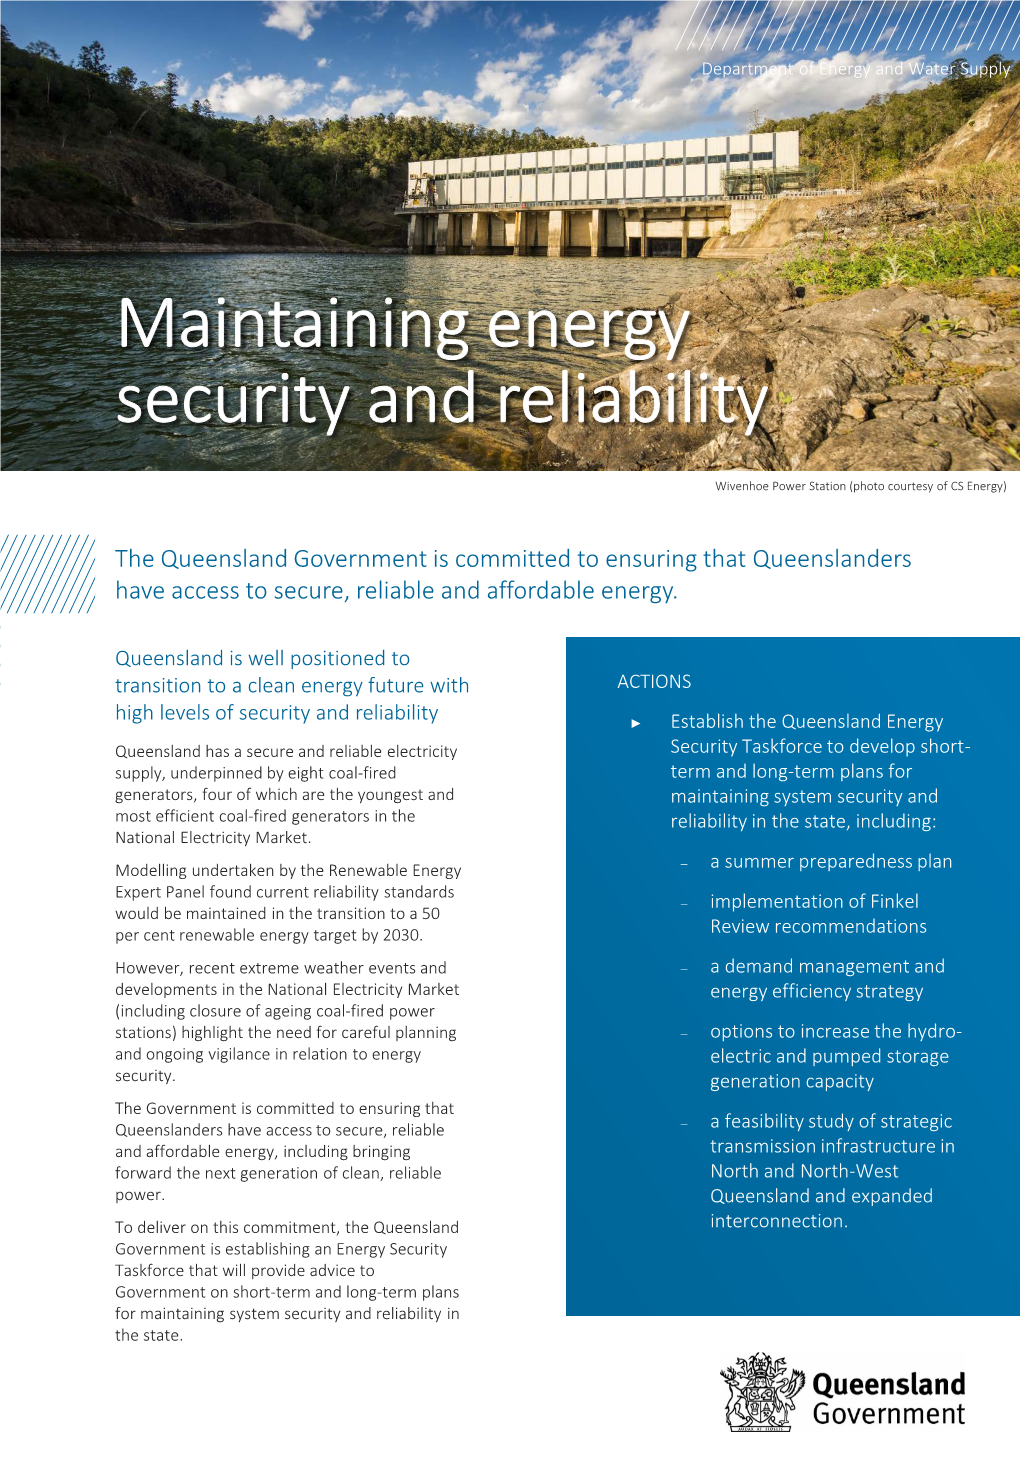 Maintaining Energy Security and Reliability